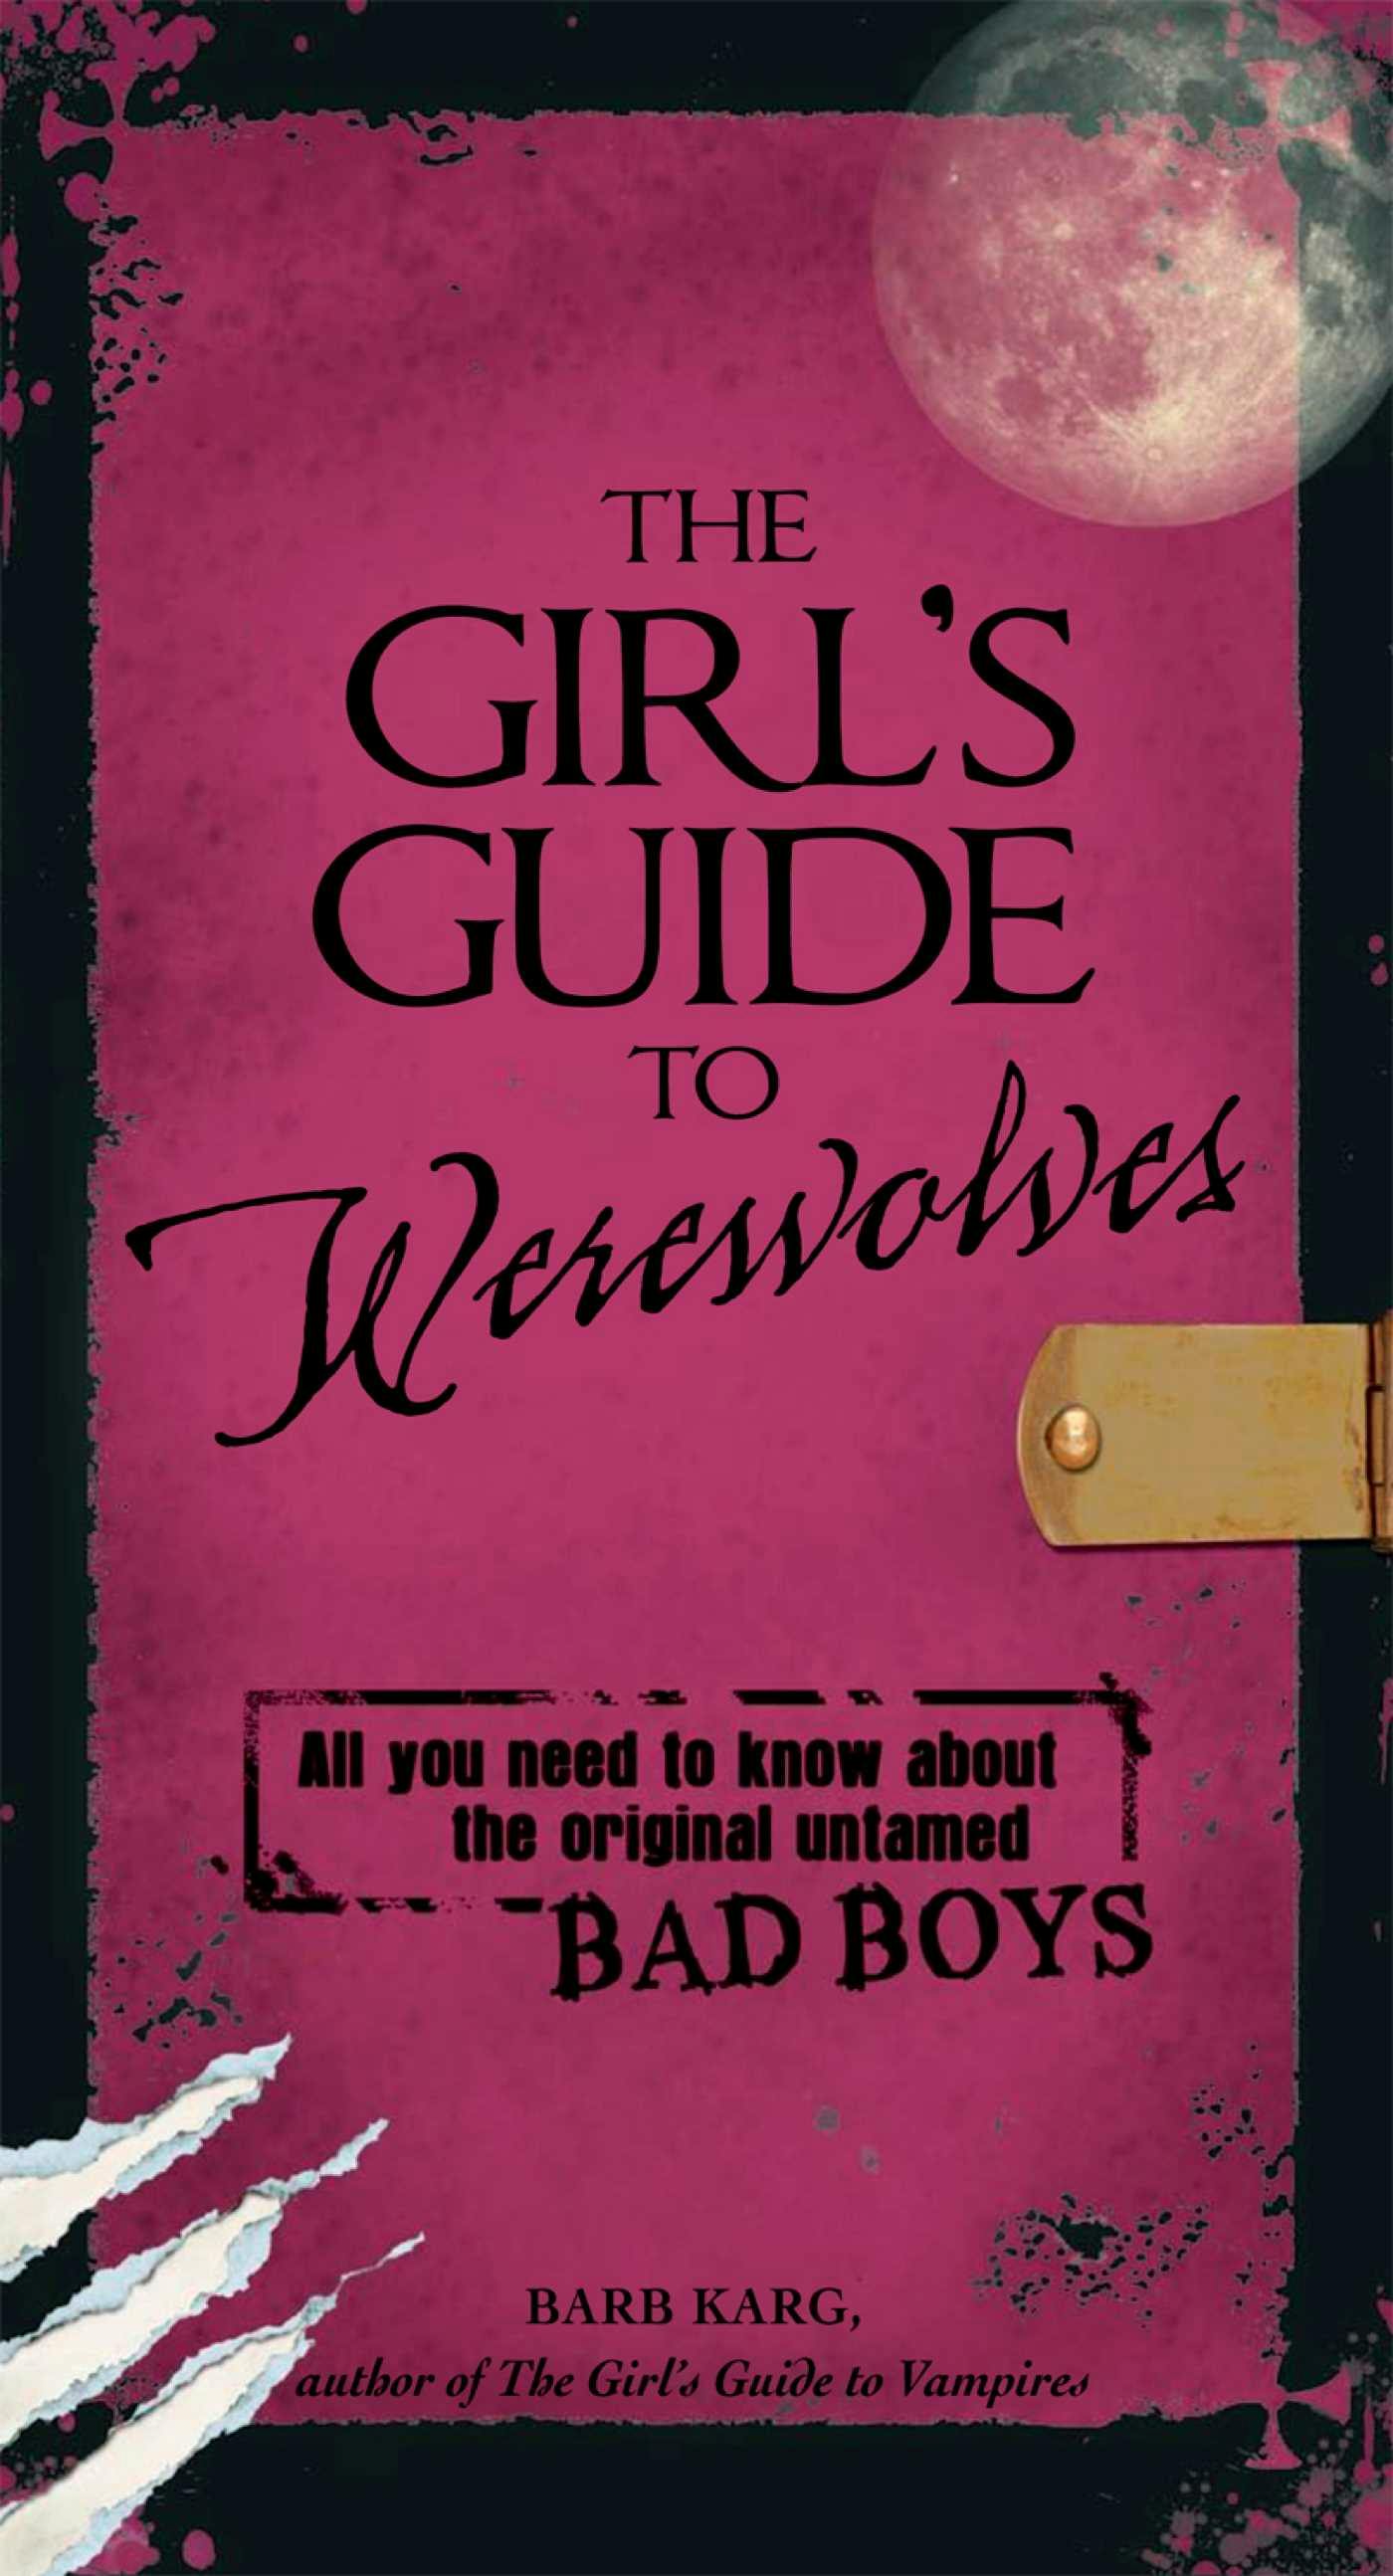 The Girl's Guide to Werewolves: All You Need to Know about the Original Untamed Bad Boys - Barb Karg